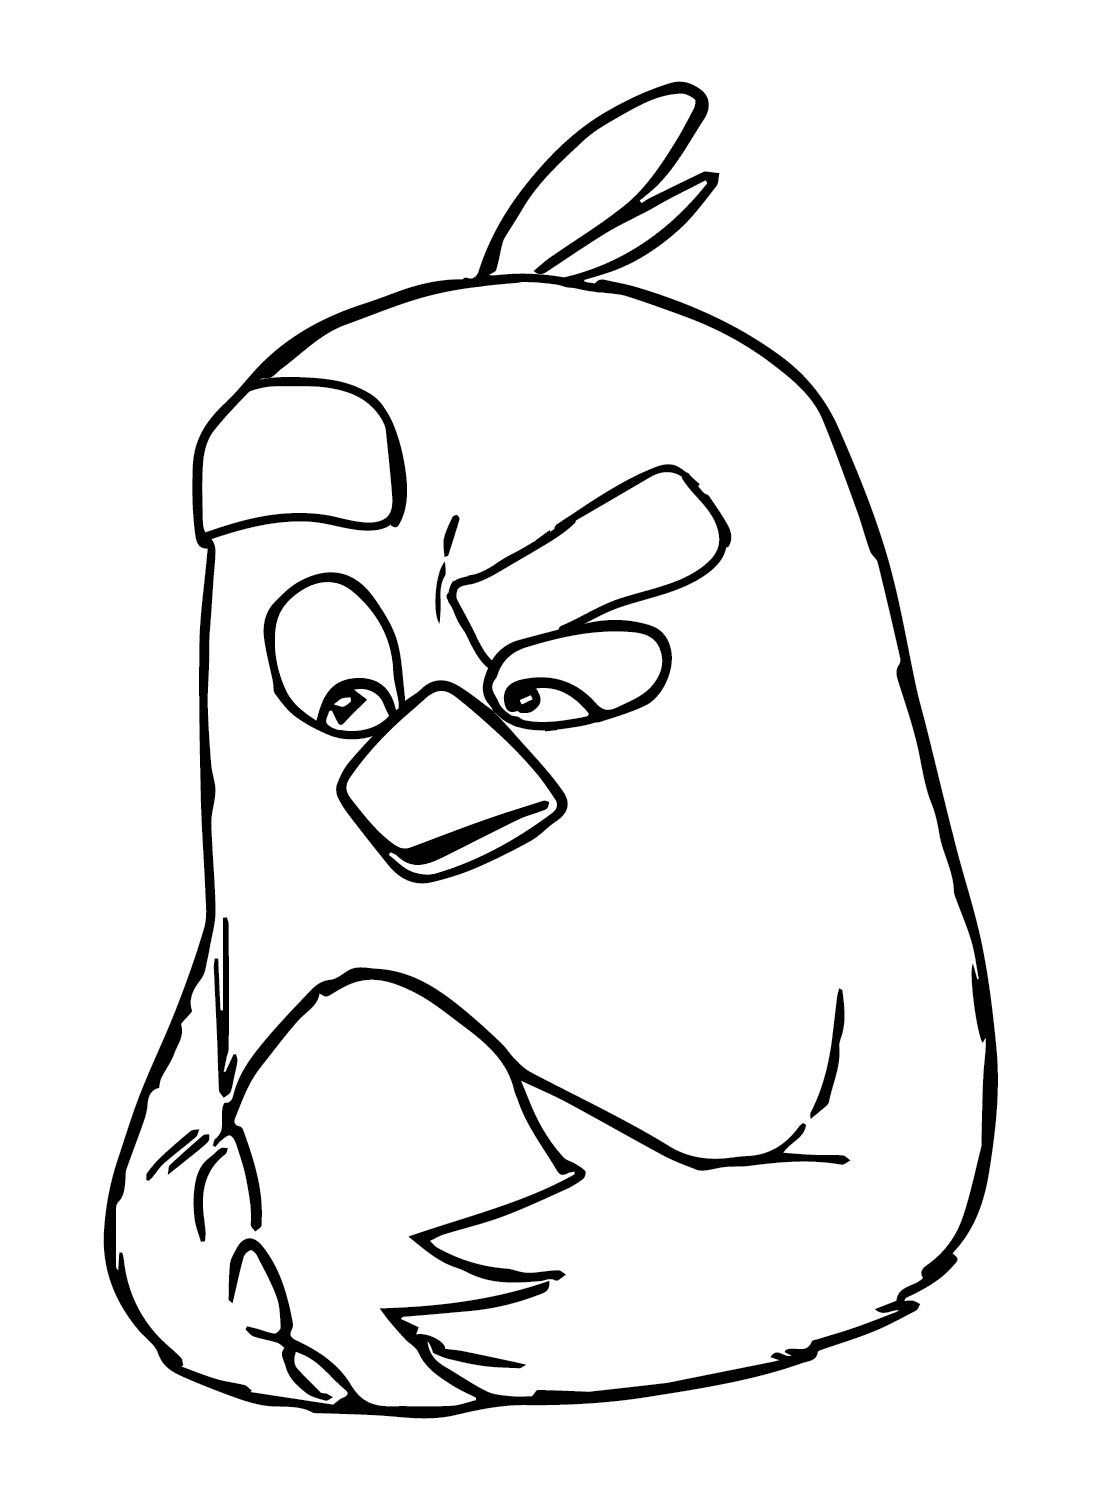 Cartoon Red (Angry Bird) Coloring Page